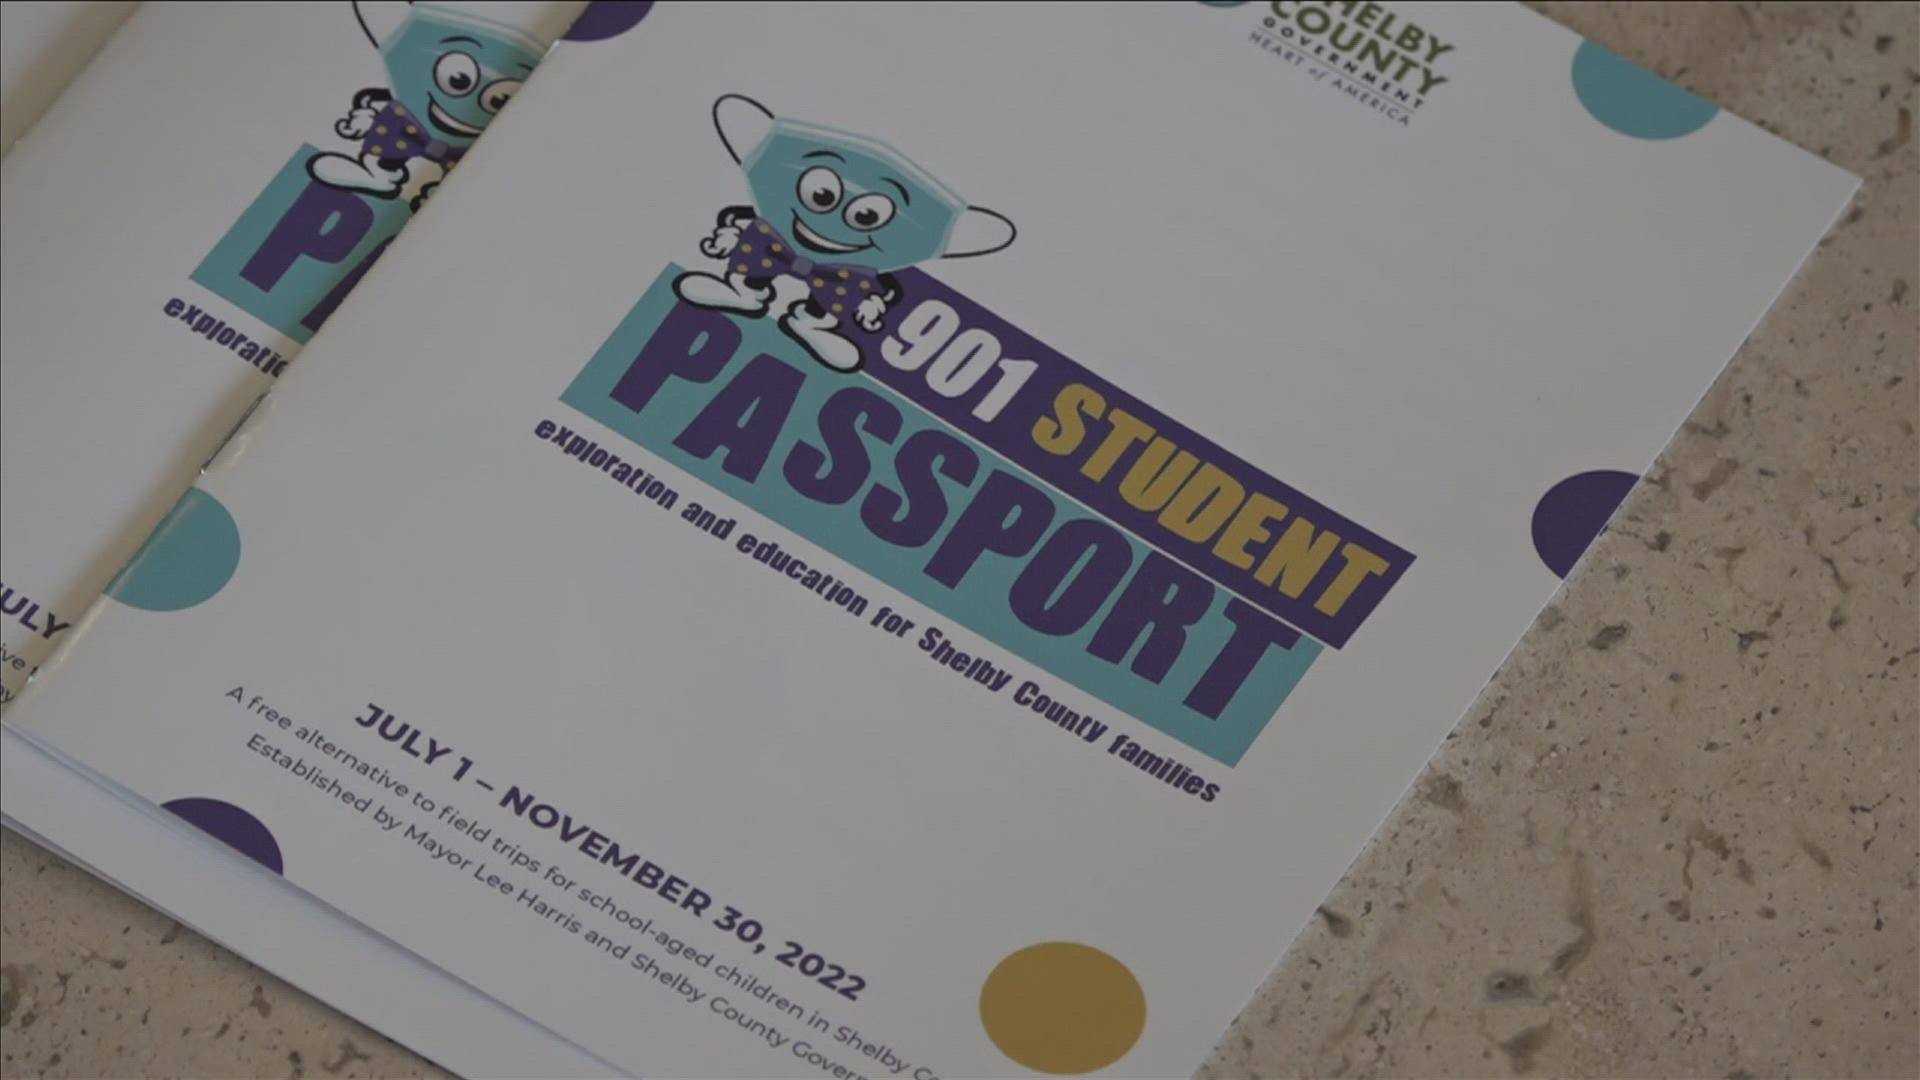 The passport provides free admission to nine participating attractions, allowing a student and a parent or guardian to visit.